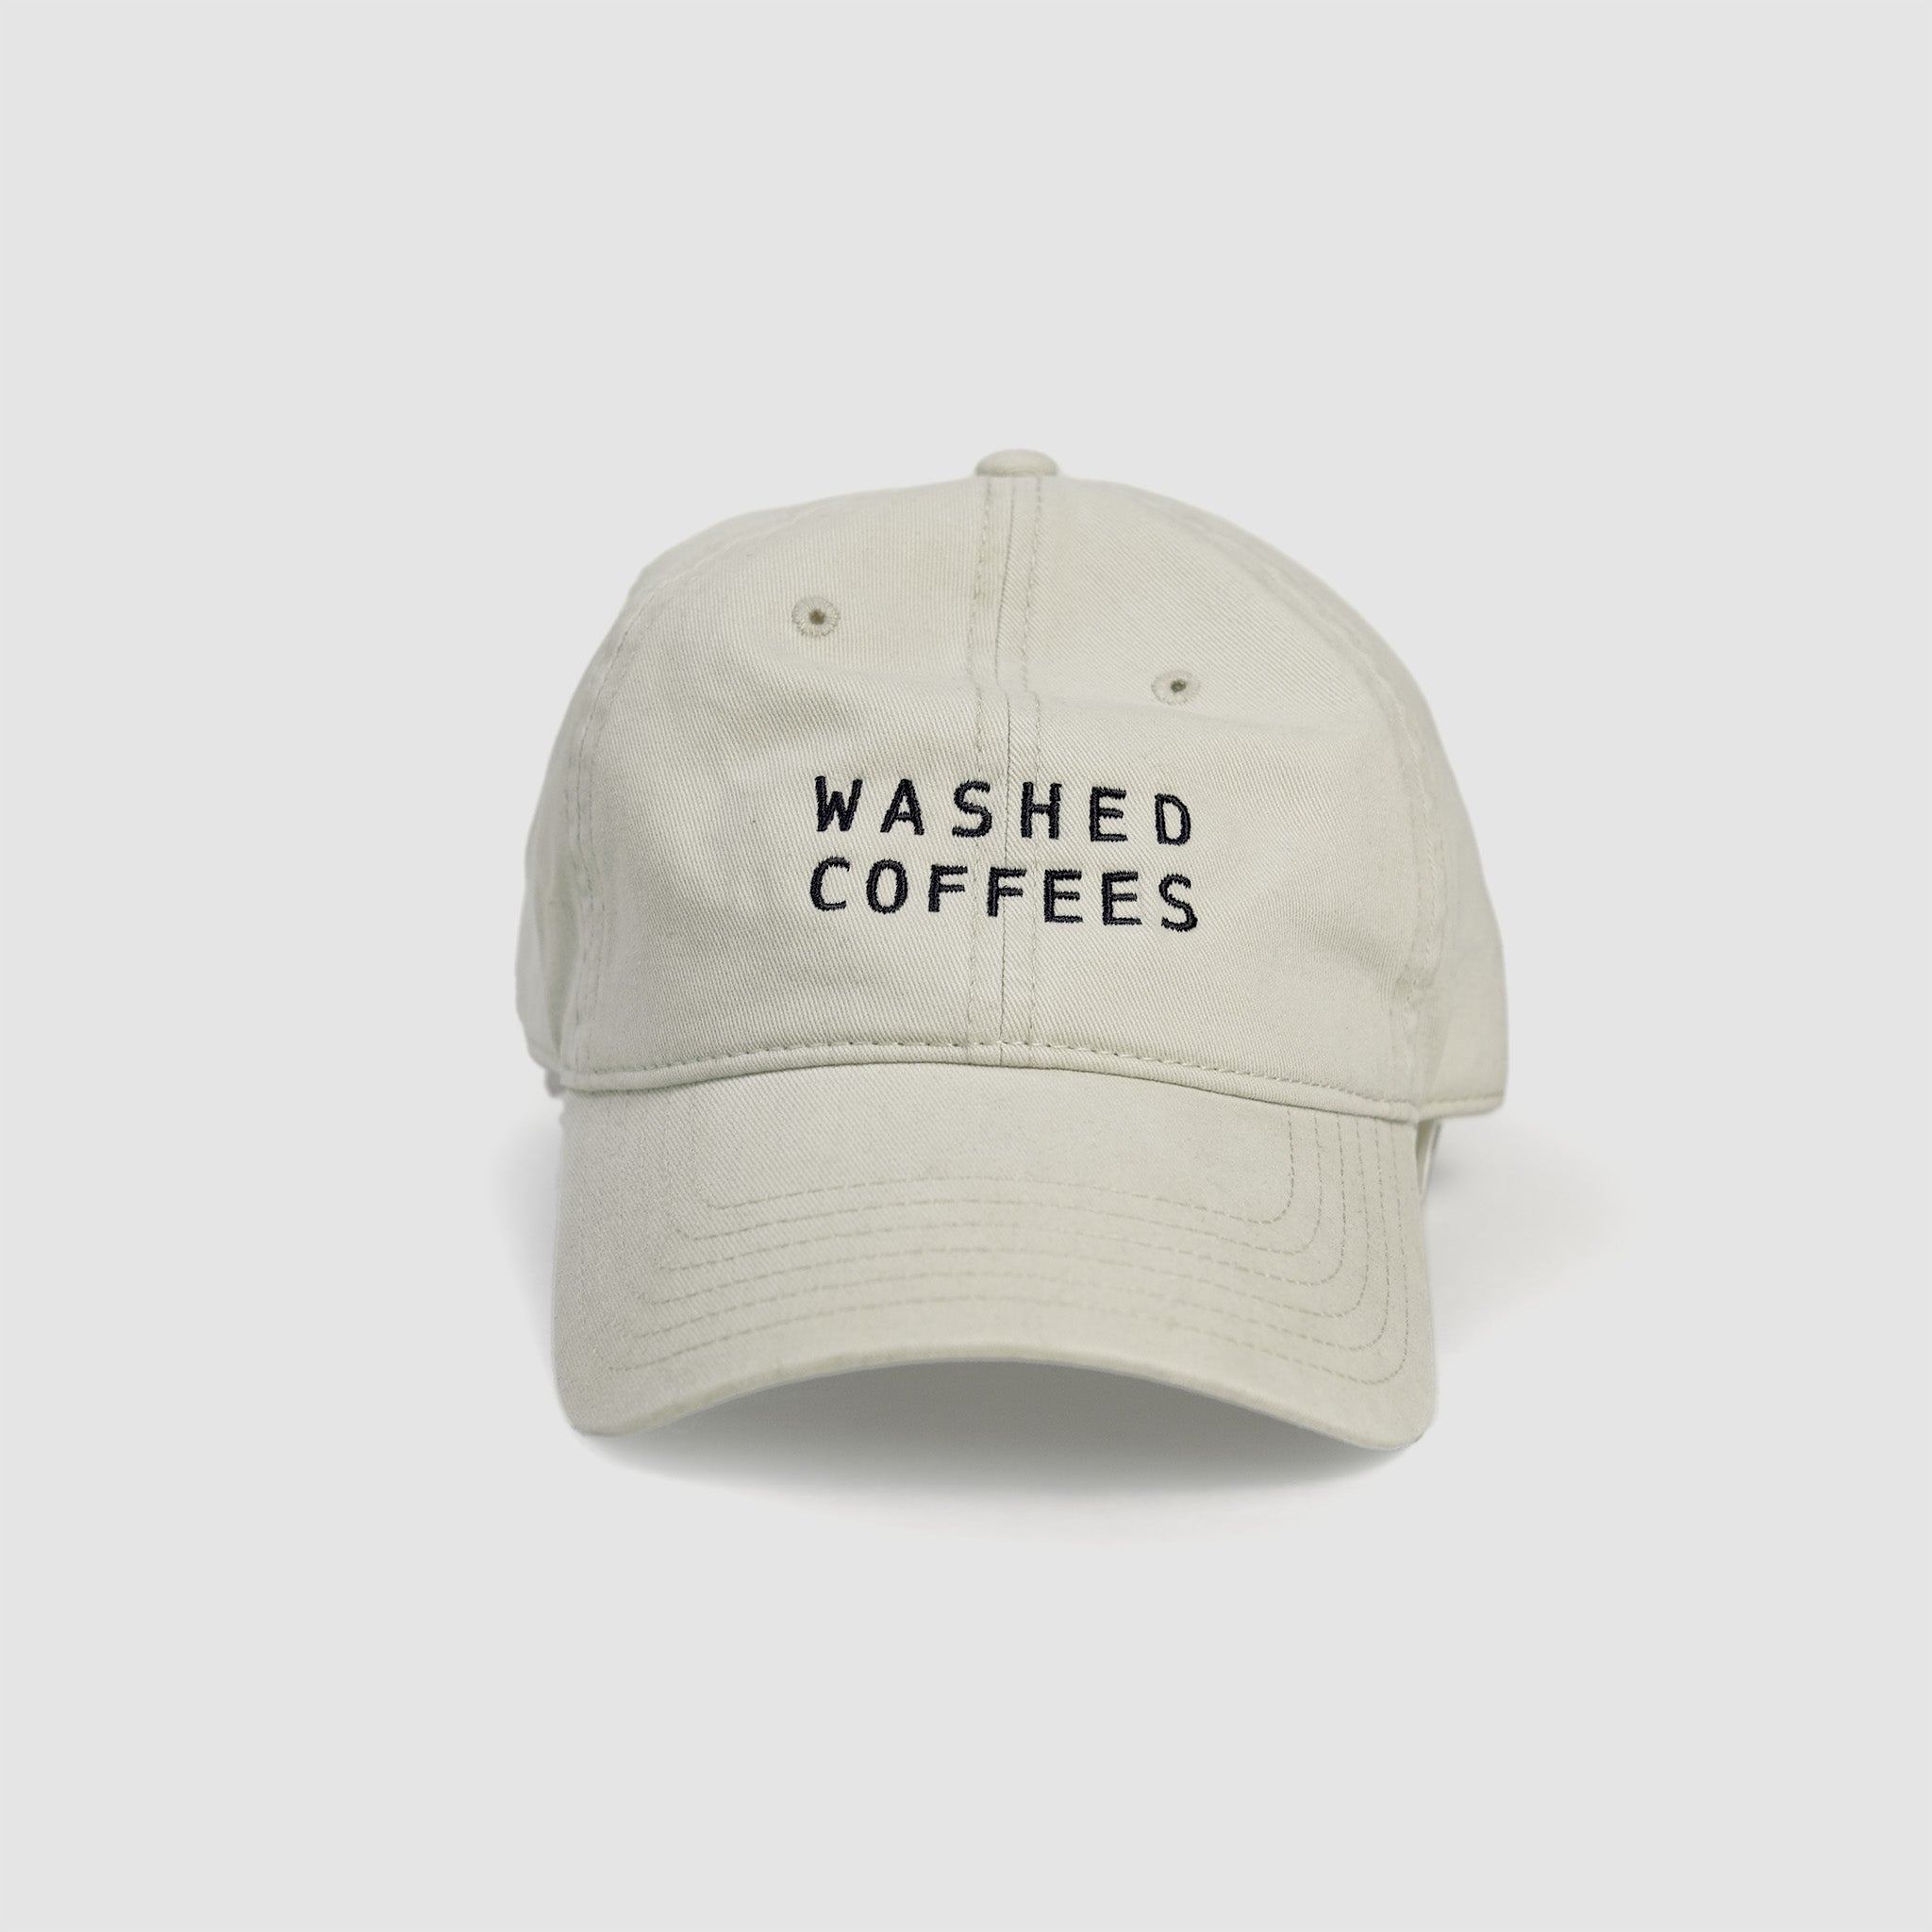 'Washed Coffees' Dad Cap